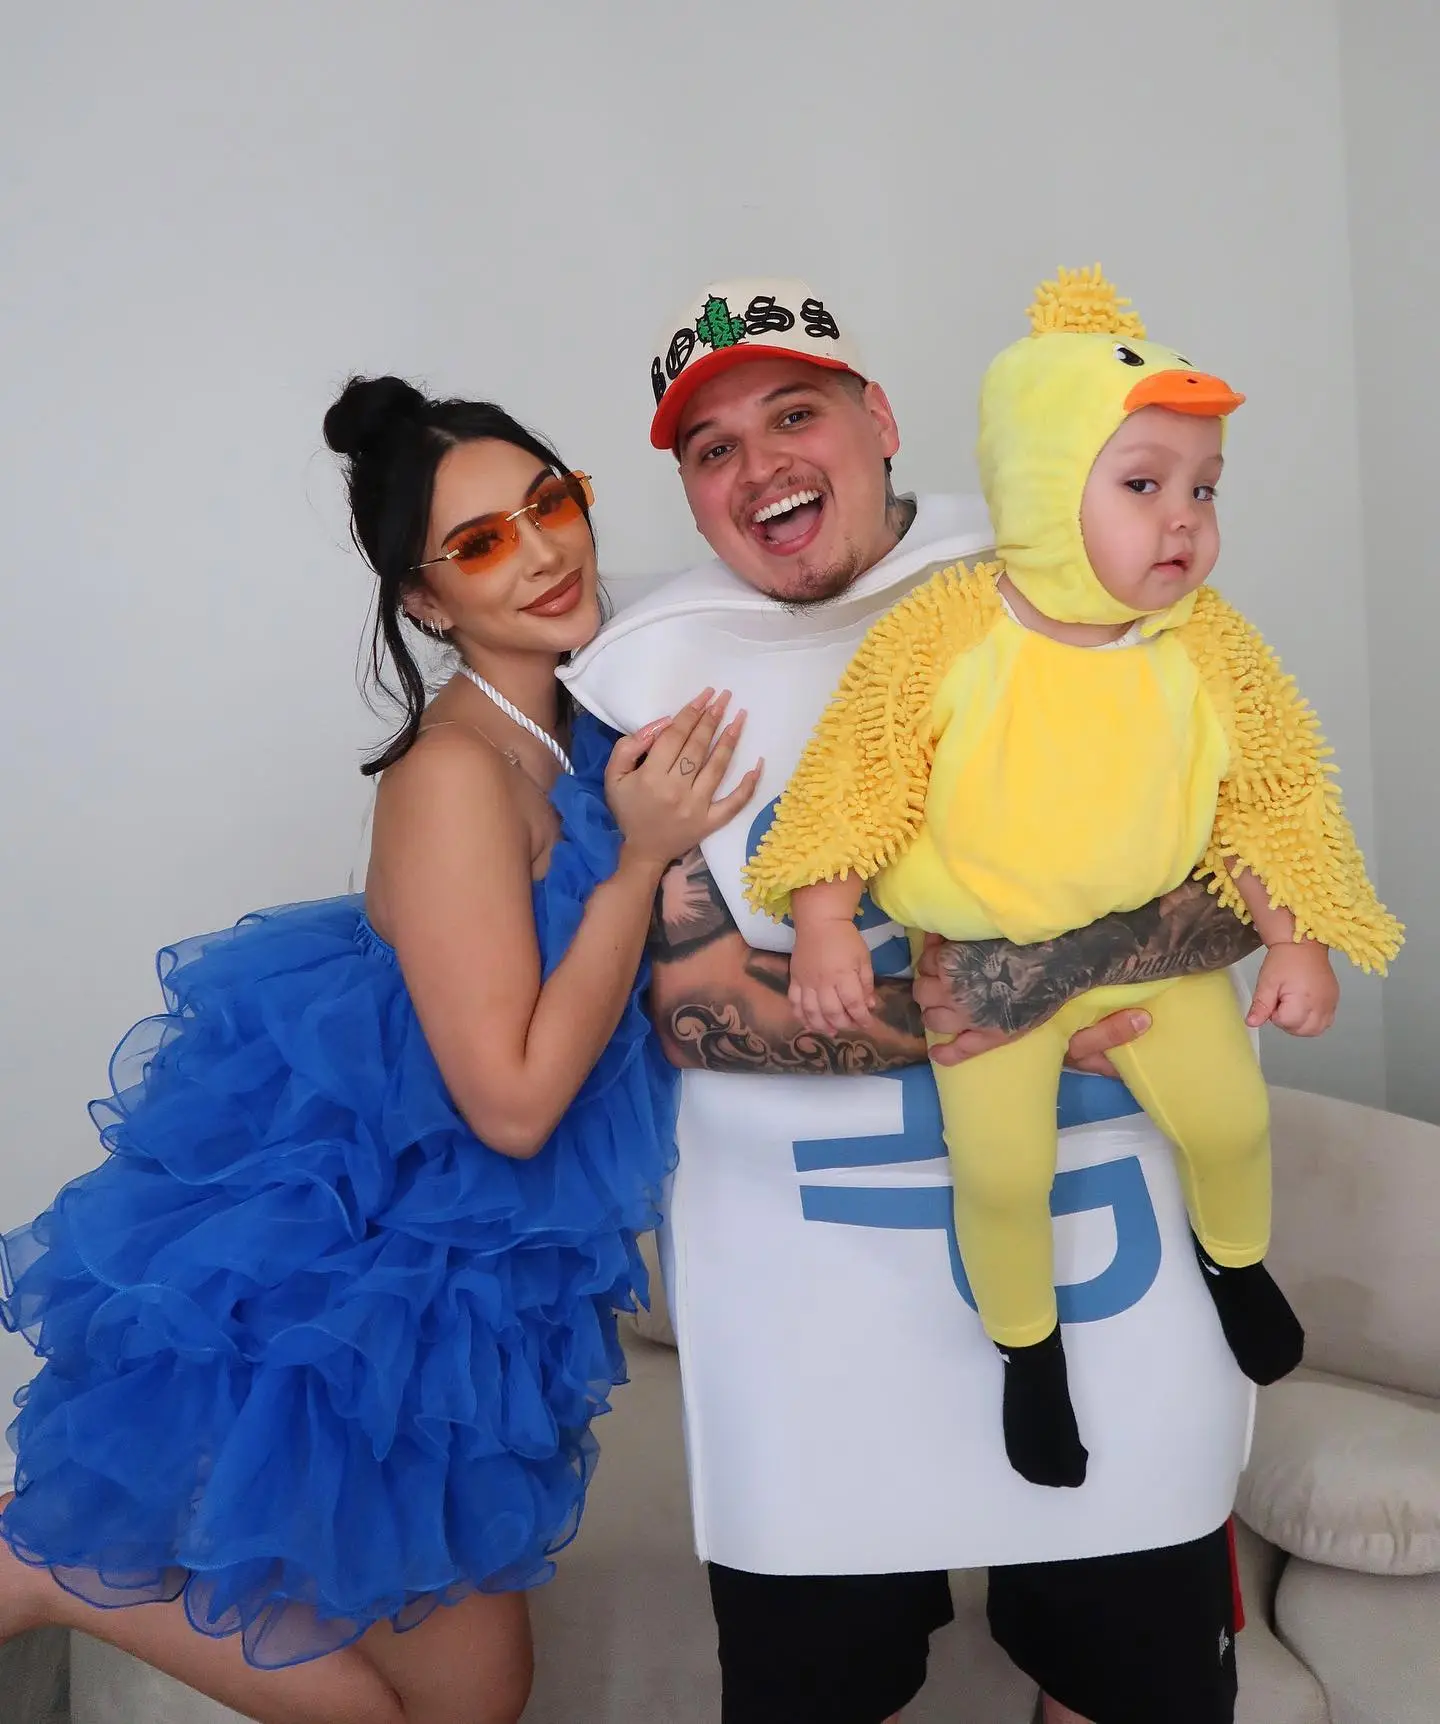 cute family of 3 costumes + loofah, soap, and duck costumes